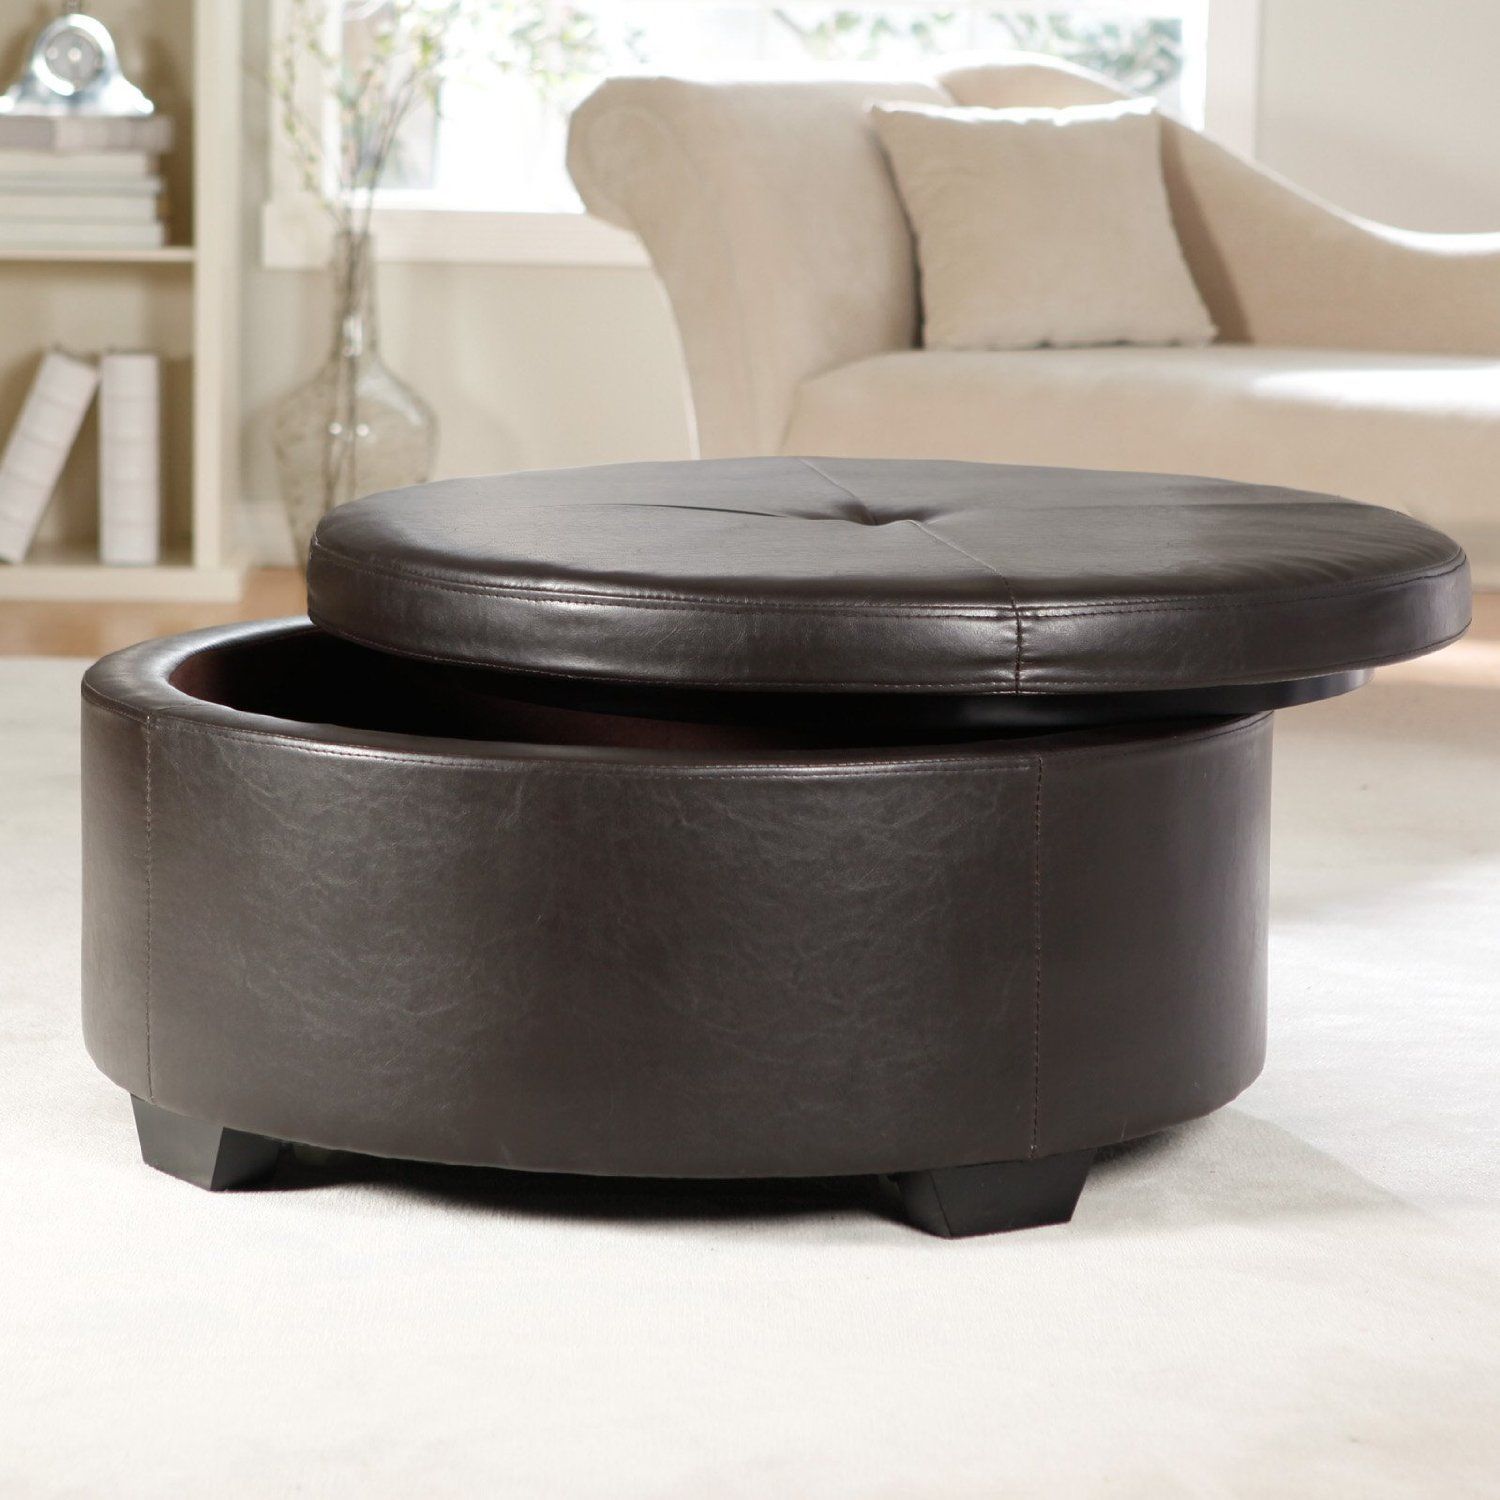 Cube Black Upholstered Living Room Ottoman Furniture Round Leather Storage Ottoman Coffee Table Coffee Table With Ottoman Storage (View 2 of 10)